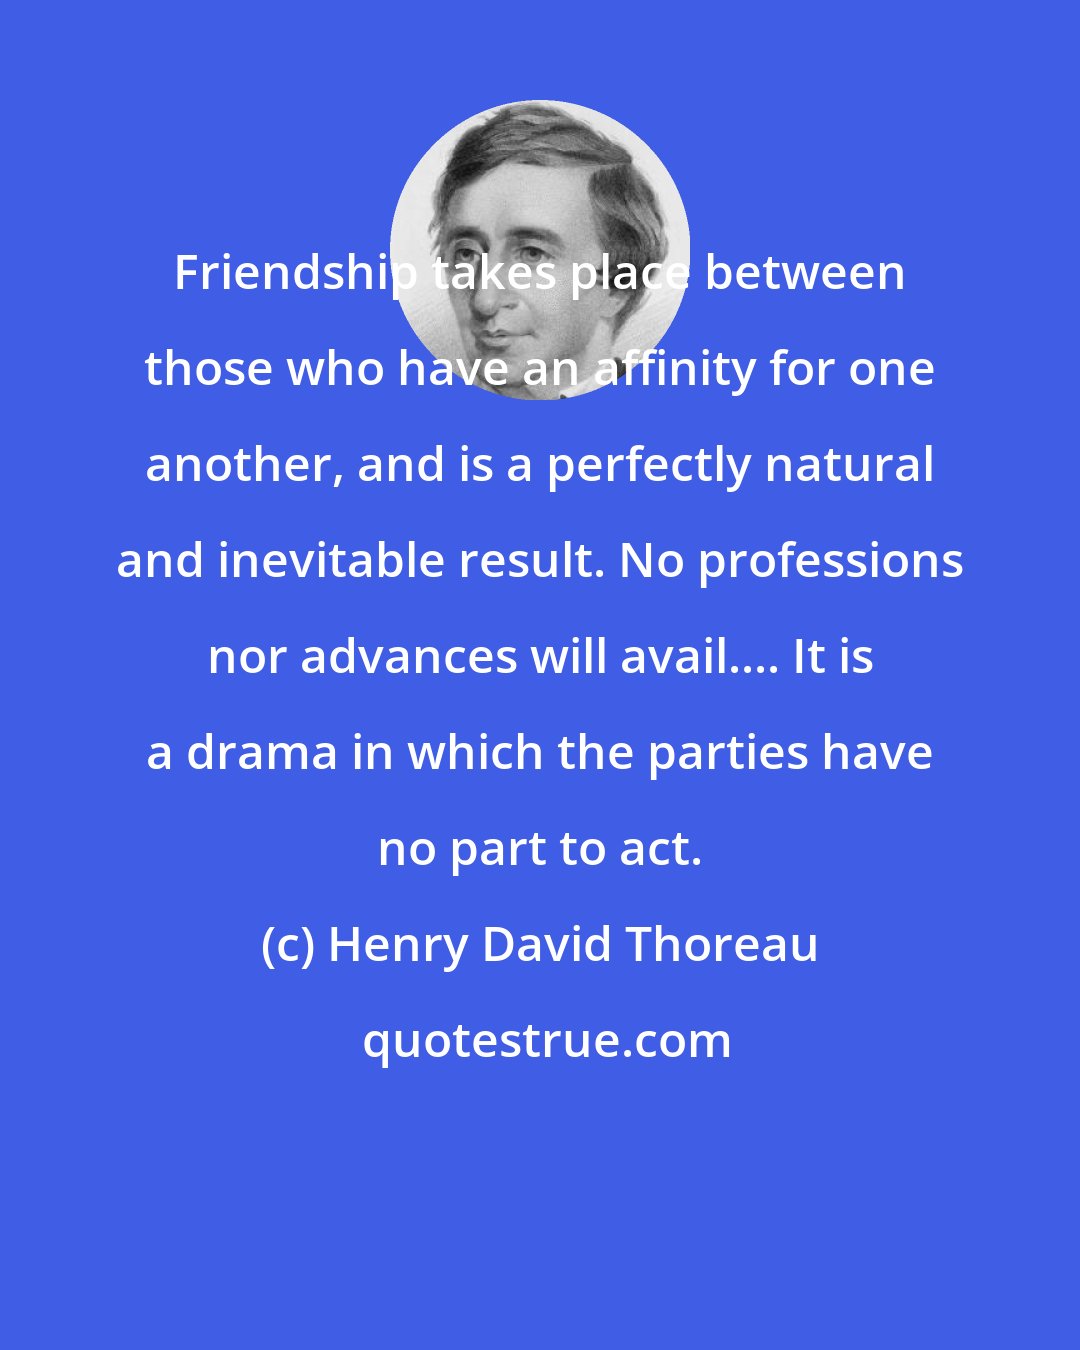 Henry David Thoreau: Friendship takes place between those who have an affinity for one another, and is a perfectly natural and inevitable result. No professions nor advances will avail.... It is a drama in which the parties have no part to act.